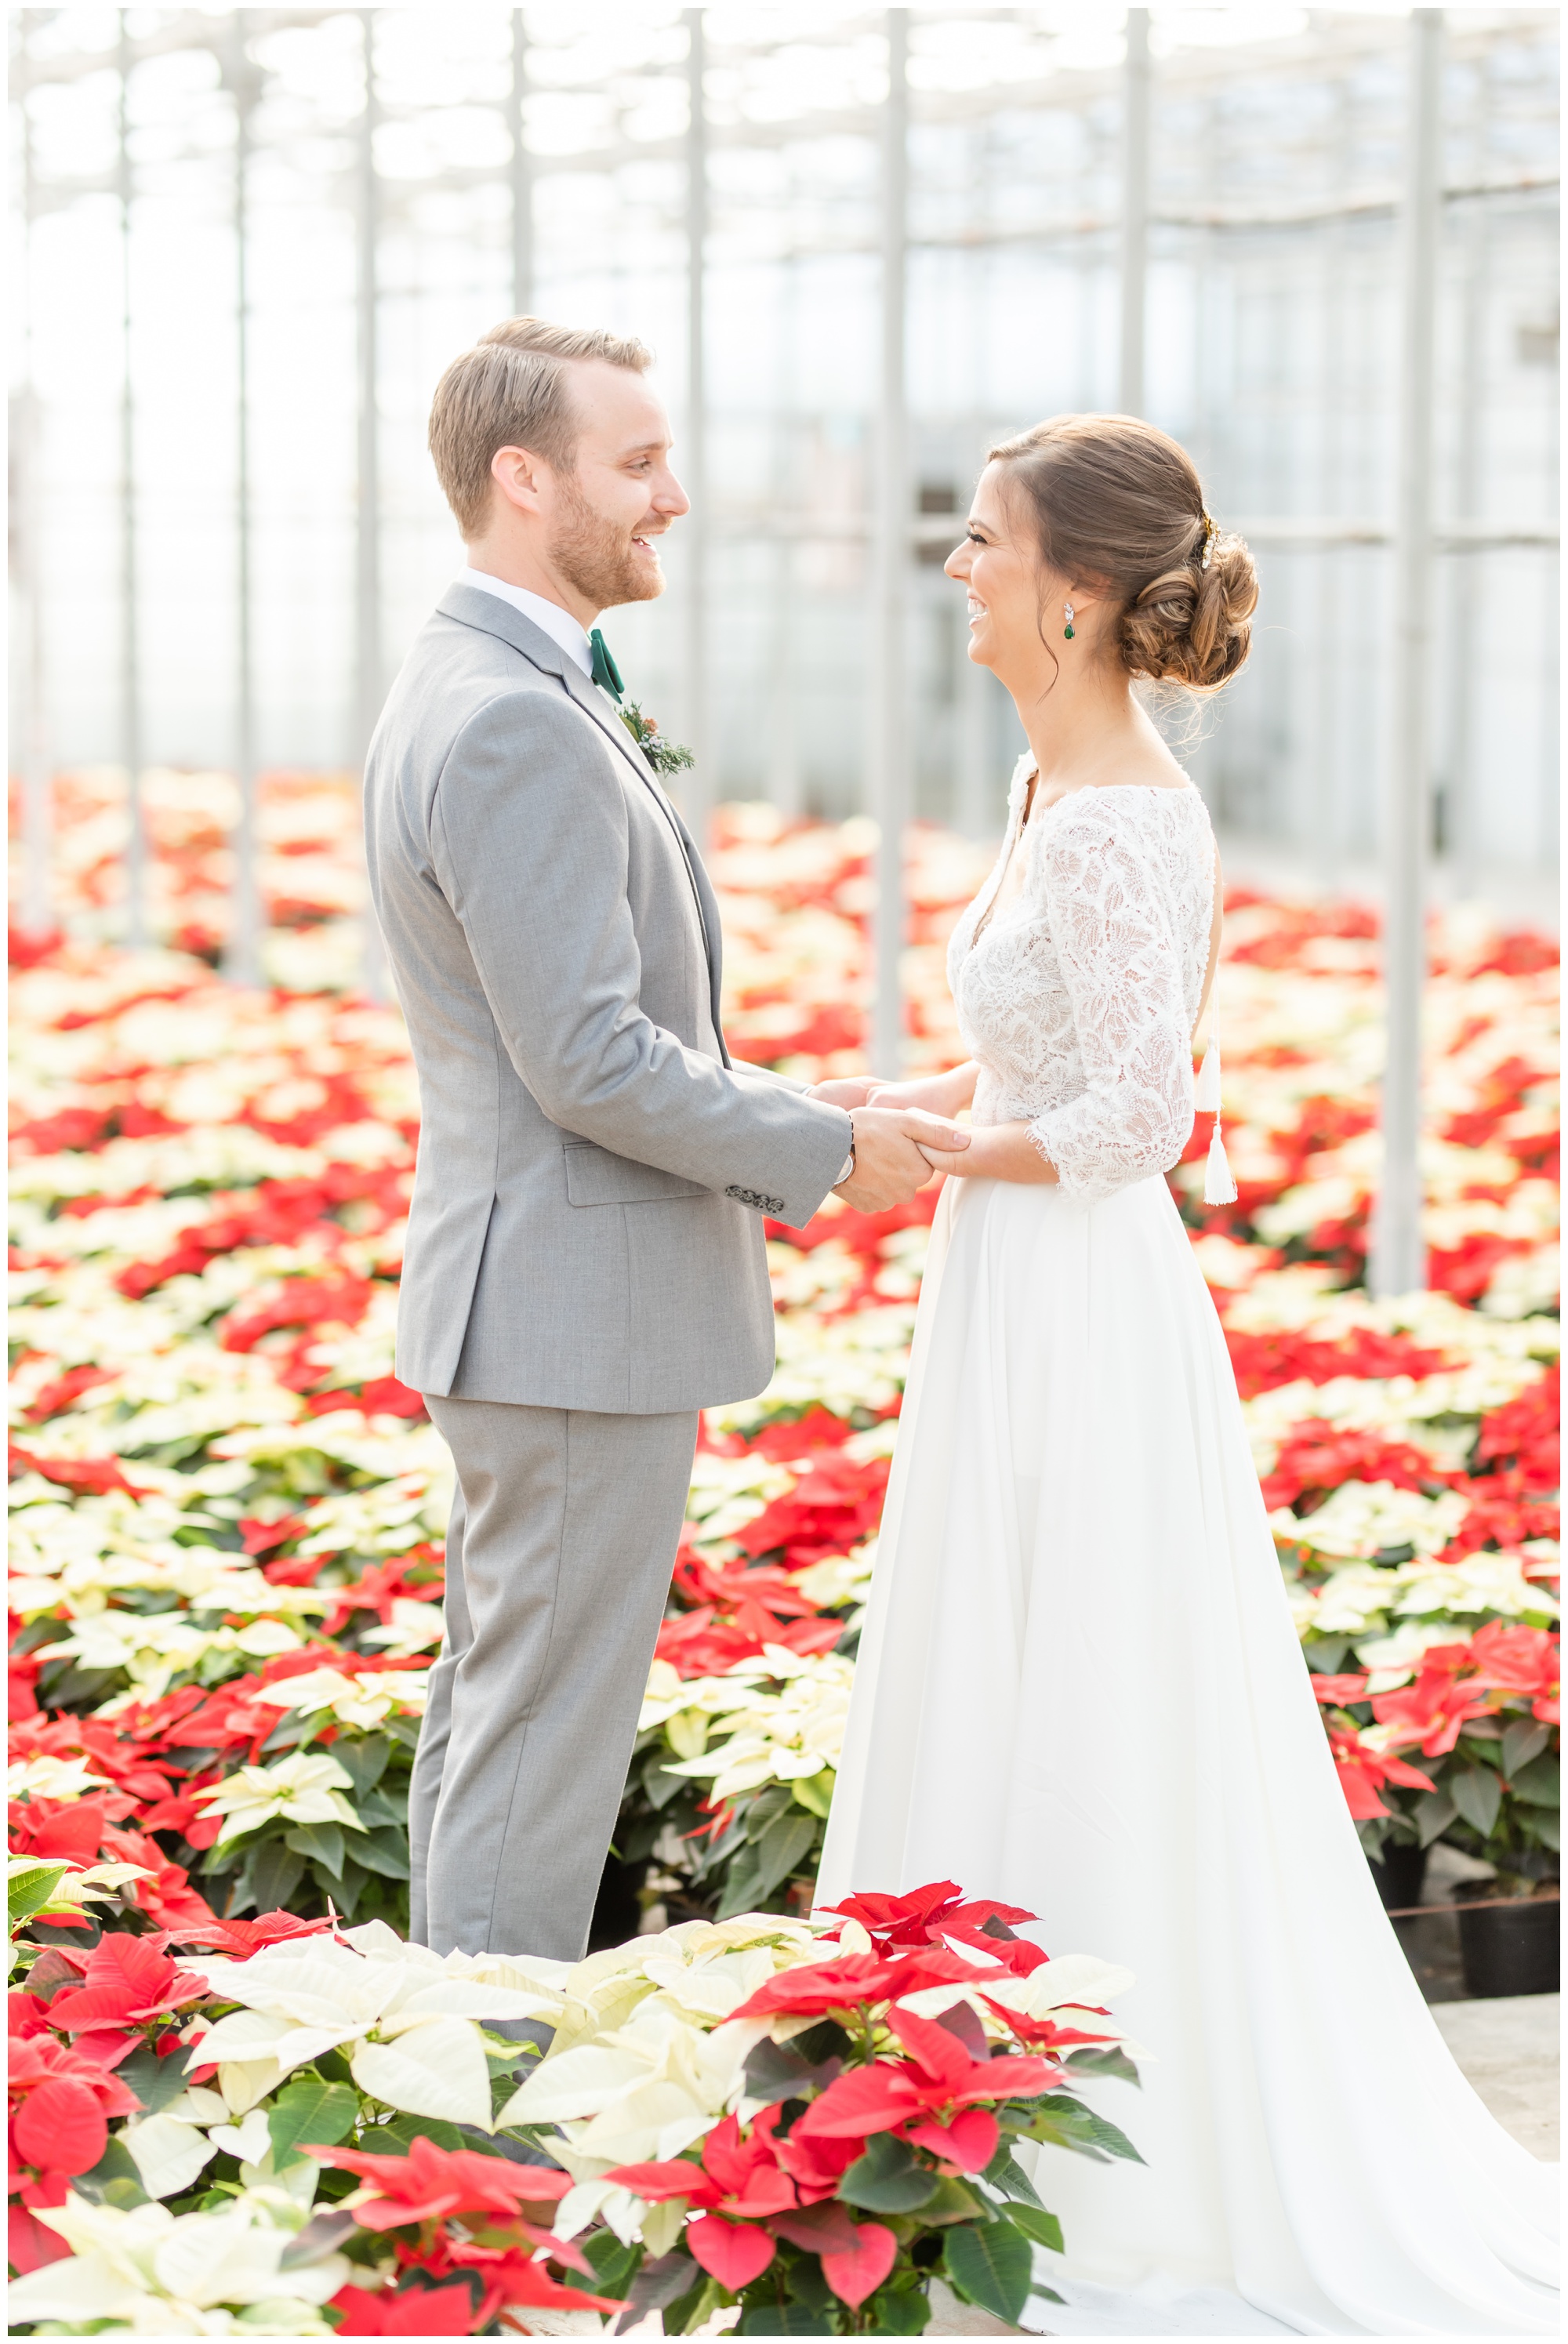 Greenhouse winter wedding with poinsettias